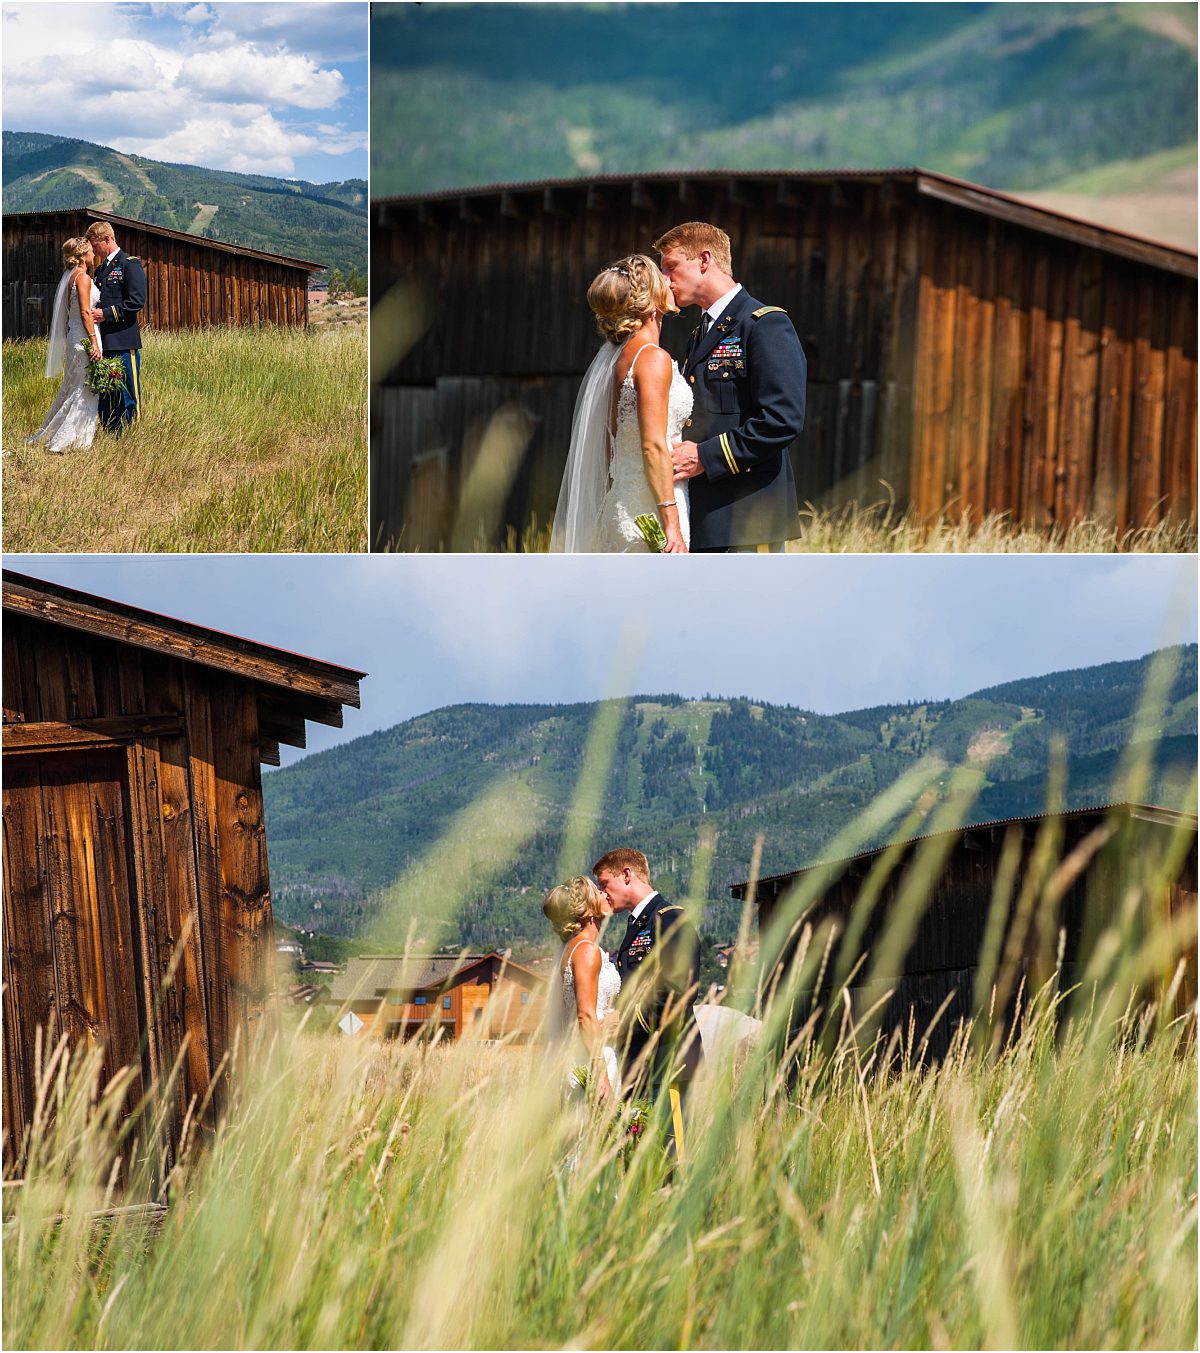 bride and groom portraits, tall grass, old wooden barn, mountain backdrop, steamboat springs wedding, colorado wedding photographer, mountain wedding photography